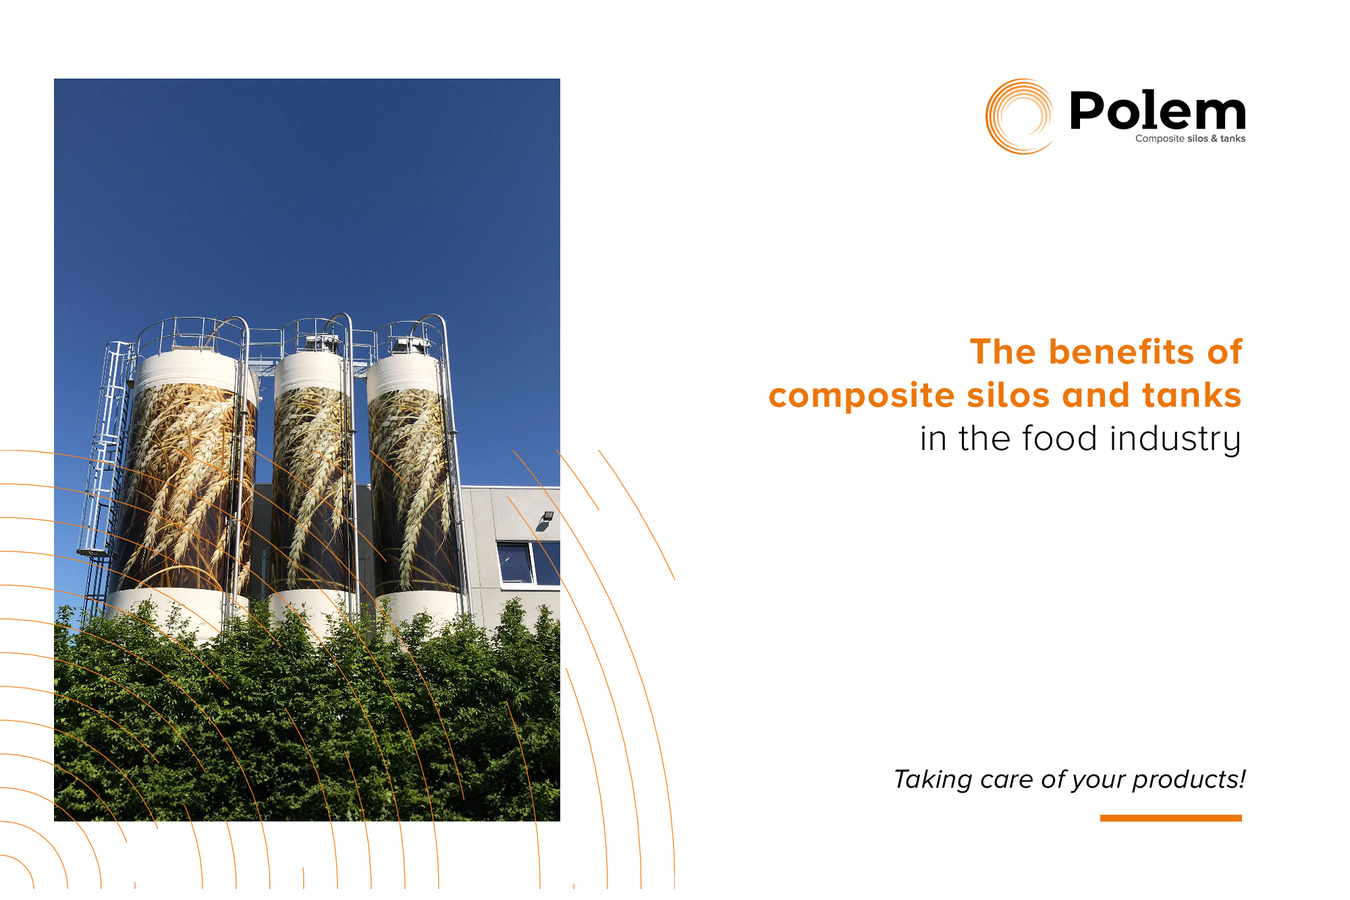 The benefits of composit silos and tanks in the food industry